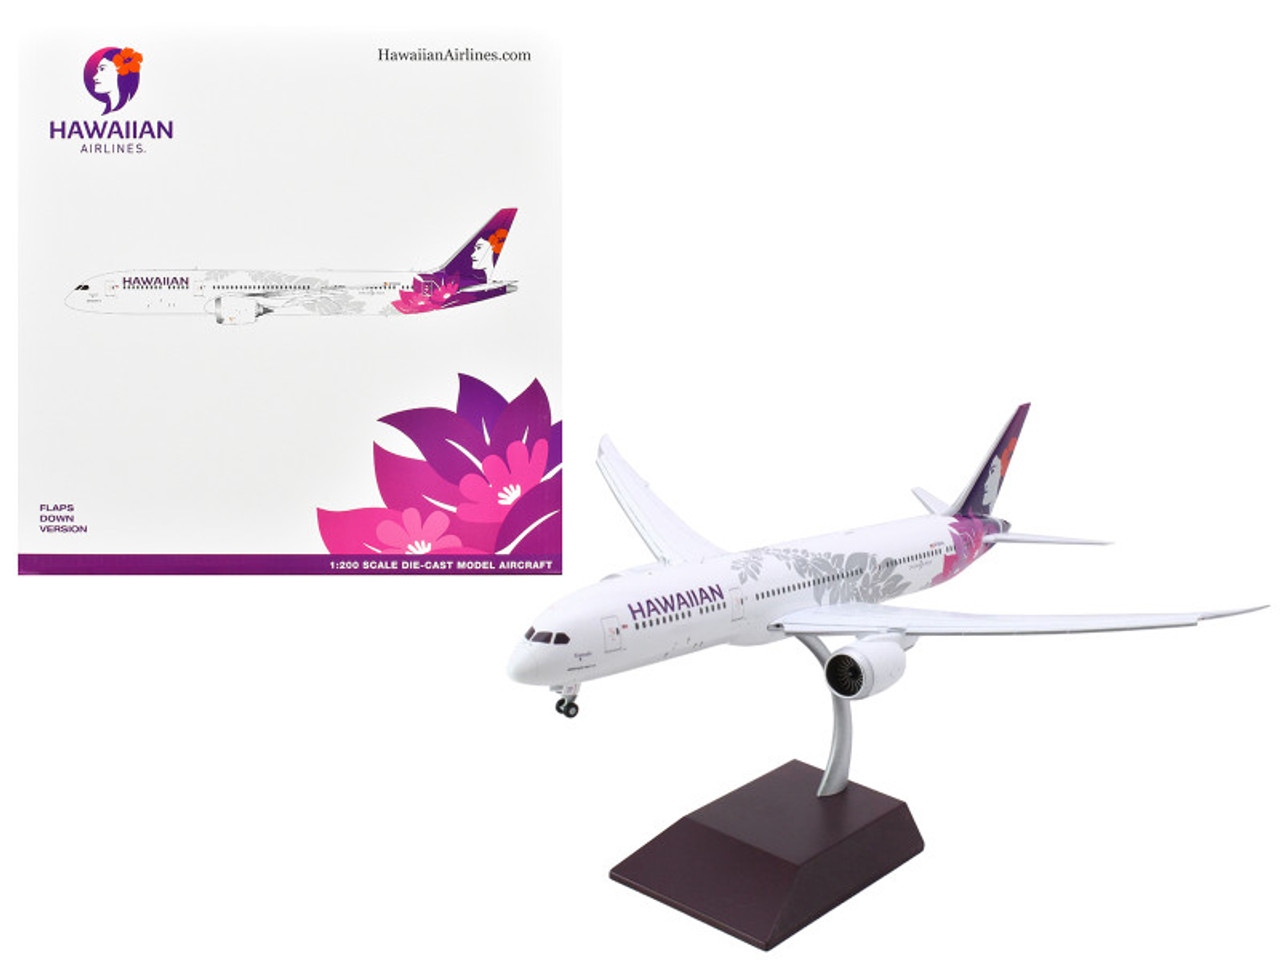 Boeing 787-9 Dreamliner Commercial Aircraft with Flaps Down "Hawaiian Airlines" (N780HA) White with Purple Tail "Gemini 200" Series 1/200 Diecast Model Airplane by GeminiJets